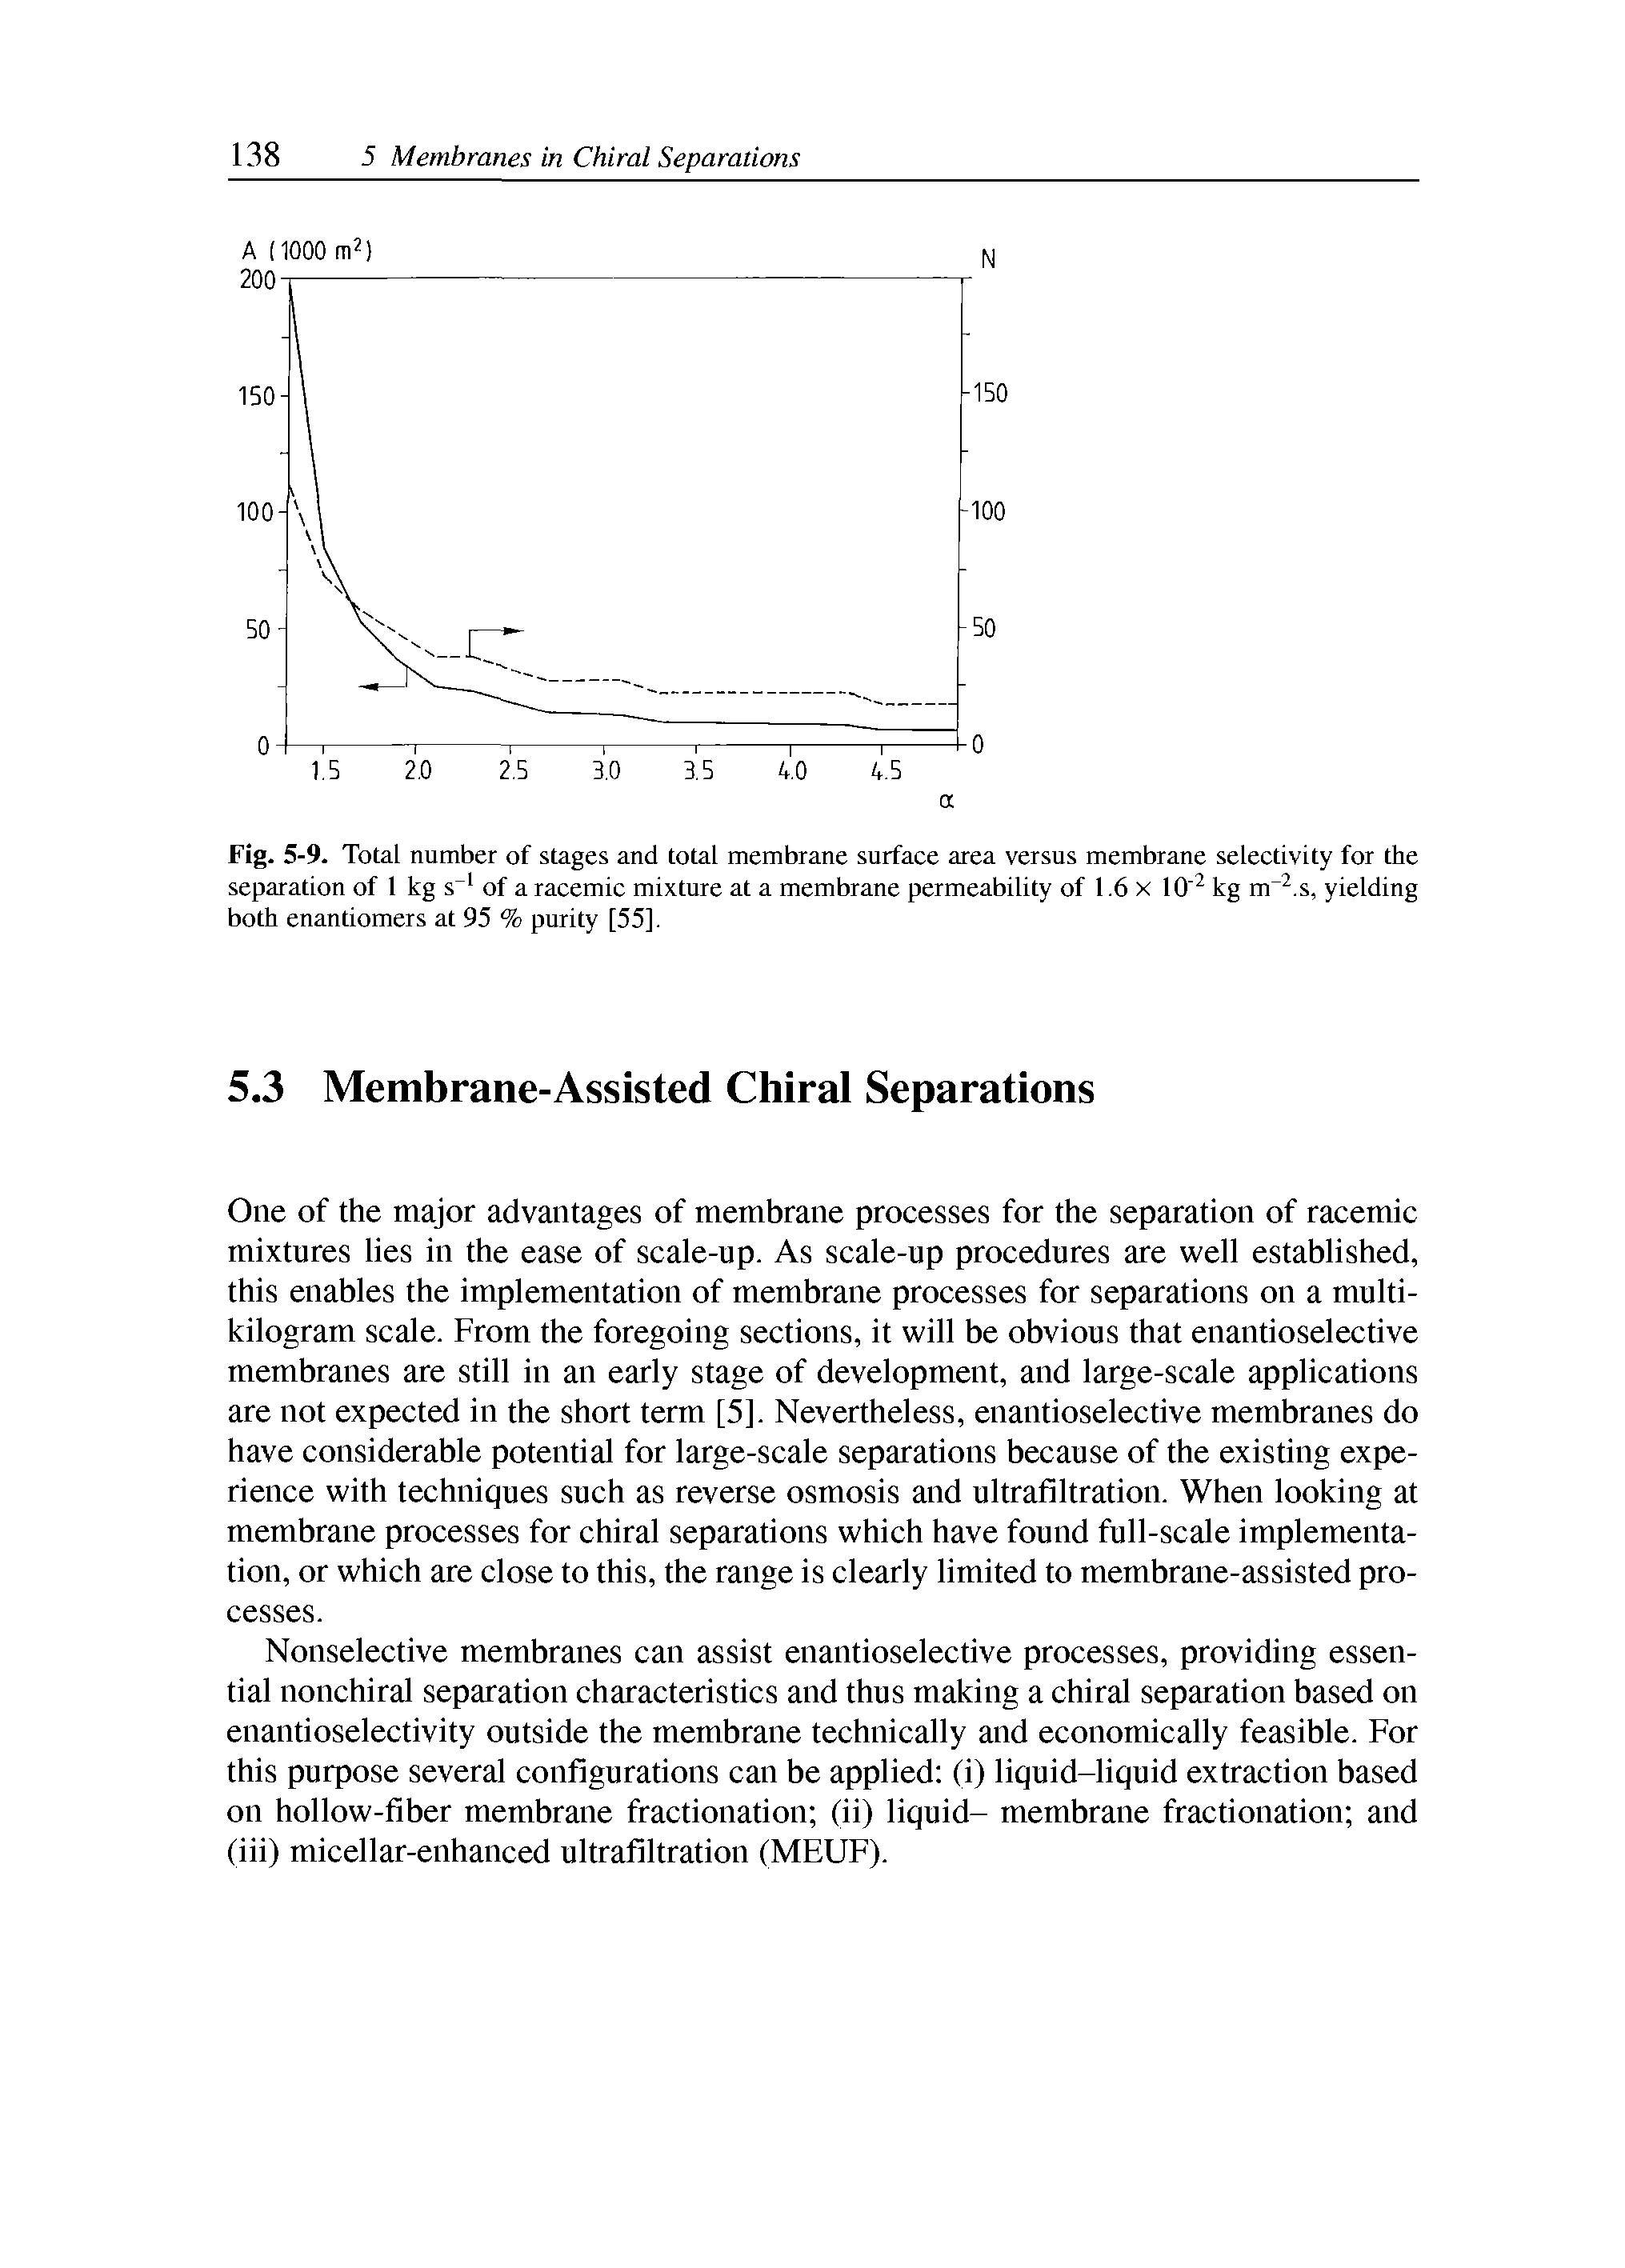 Fig. 5-9. Total number of stages and total membrane surfaee area versus membrane seleetivity for the separation of 1 kg s of a raeemie mixture at a membrane permeability of 1.6 x 10 kg m. s, yielding both enantiomers at 95 % purity [55].